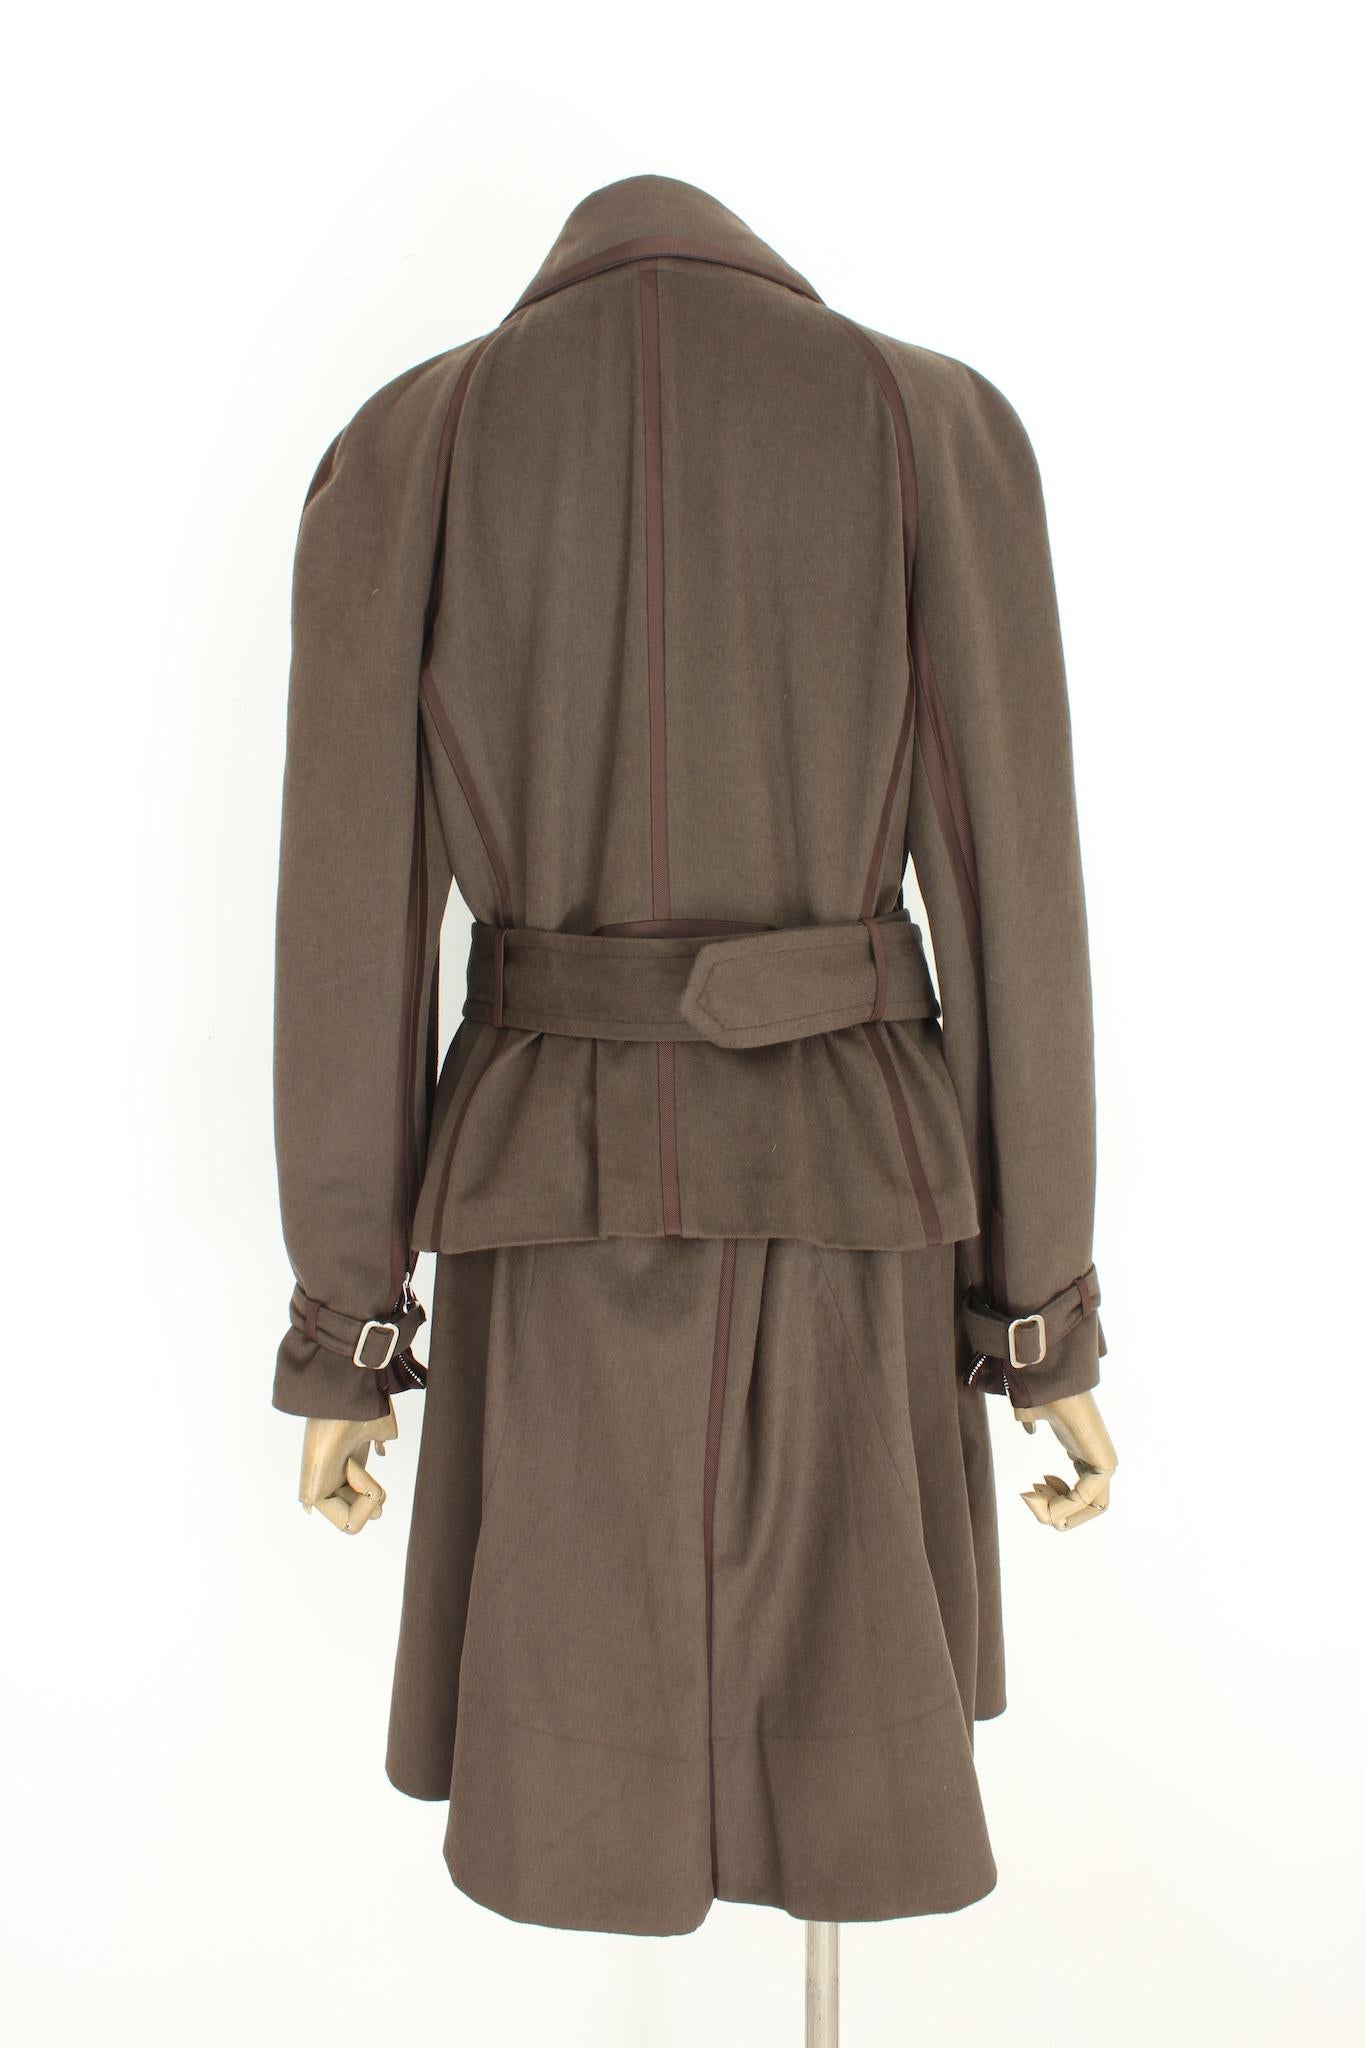 Gianfranco Ferre classic vintage 90s suit. Jacket and skirt in soft fine fabric from orylag to cashgora. Brown colour, the fitted jacket with removable collar, zip closure and belt at the waist, there are also zips on the sleeves. Flared midi skirt